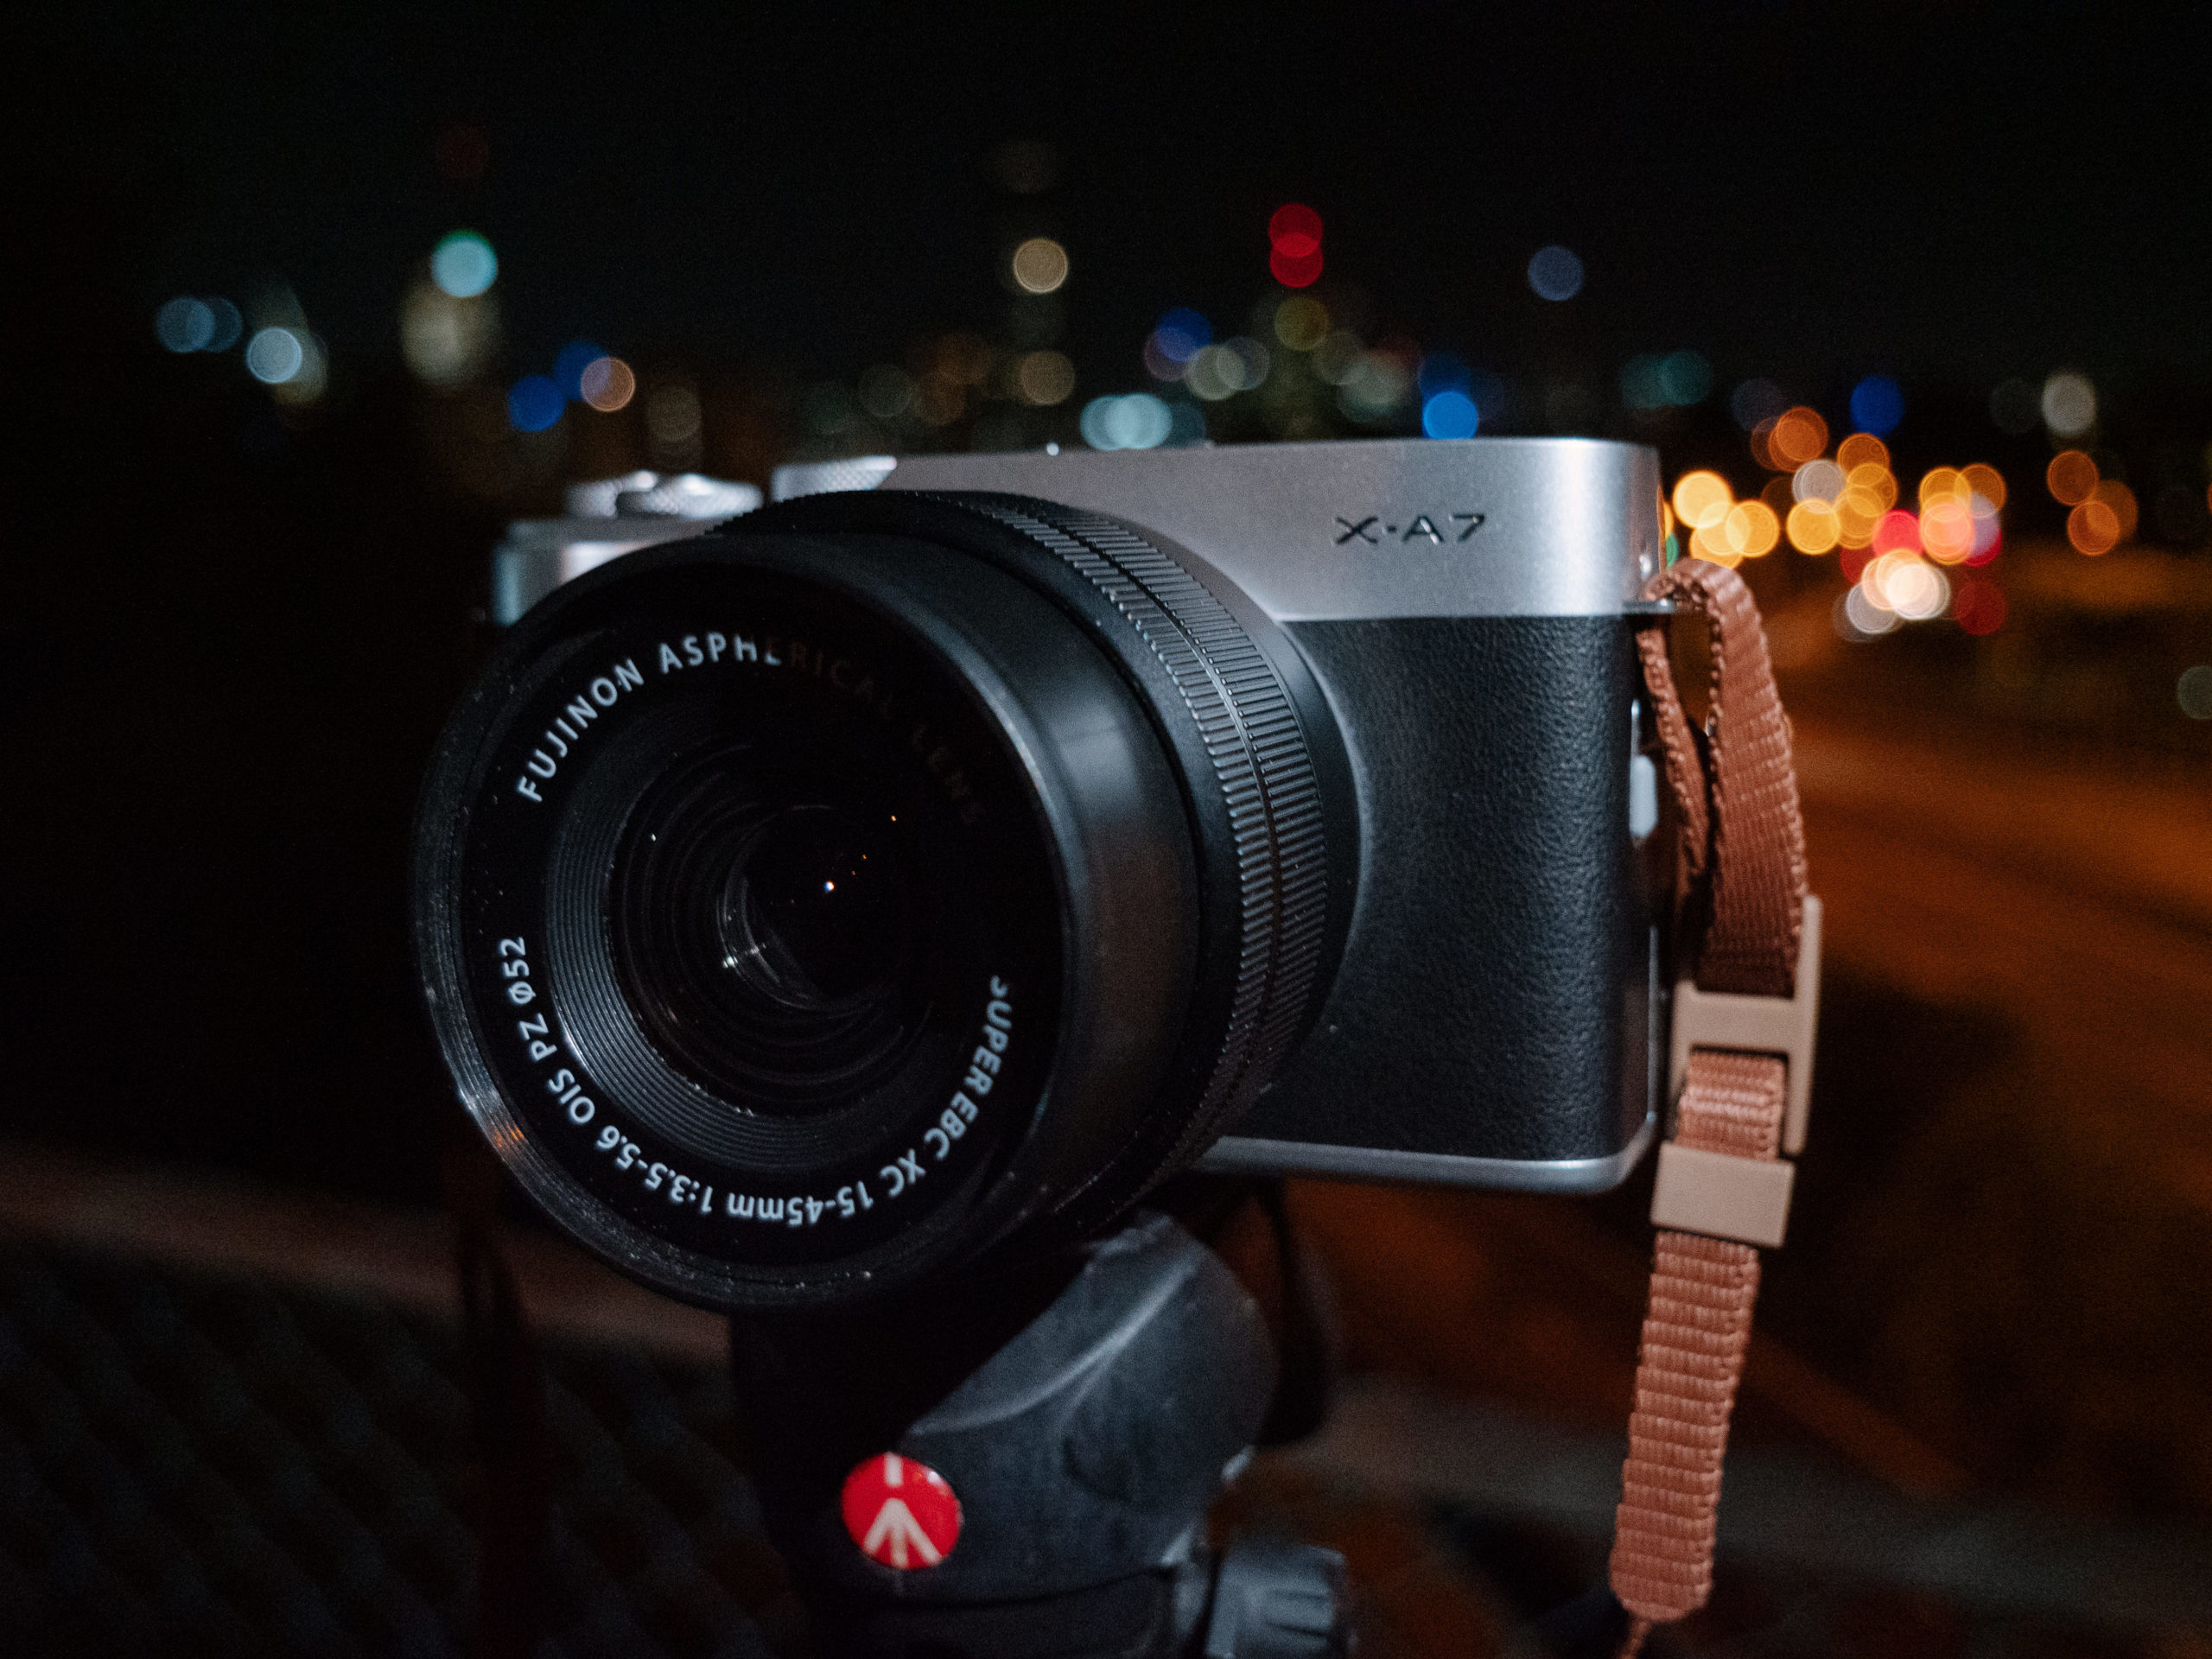 Fujifilm X-A7 Camera Review: The Best Value Entry Level Mirrorless